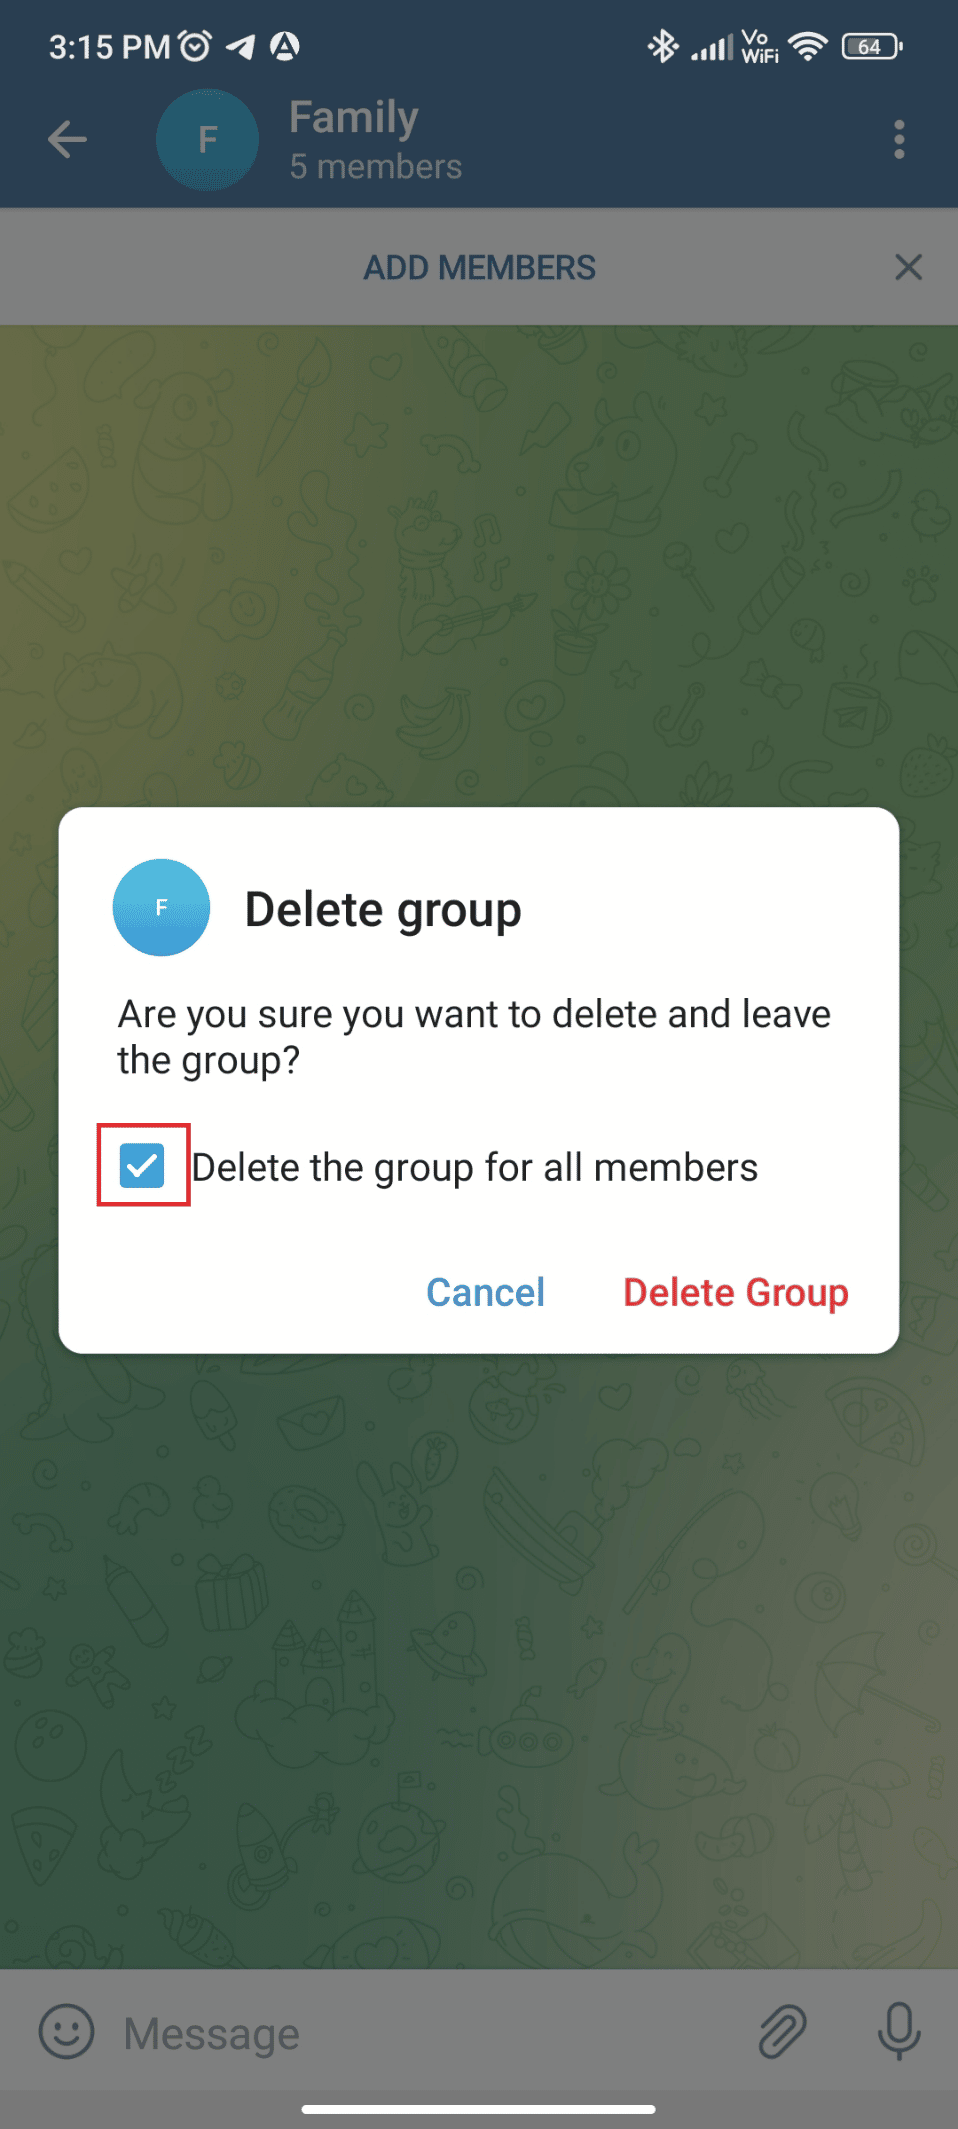 Tap on the checkbox to delete the group for all member or leave it as it is to delete it for yourself 